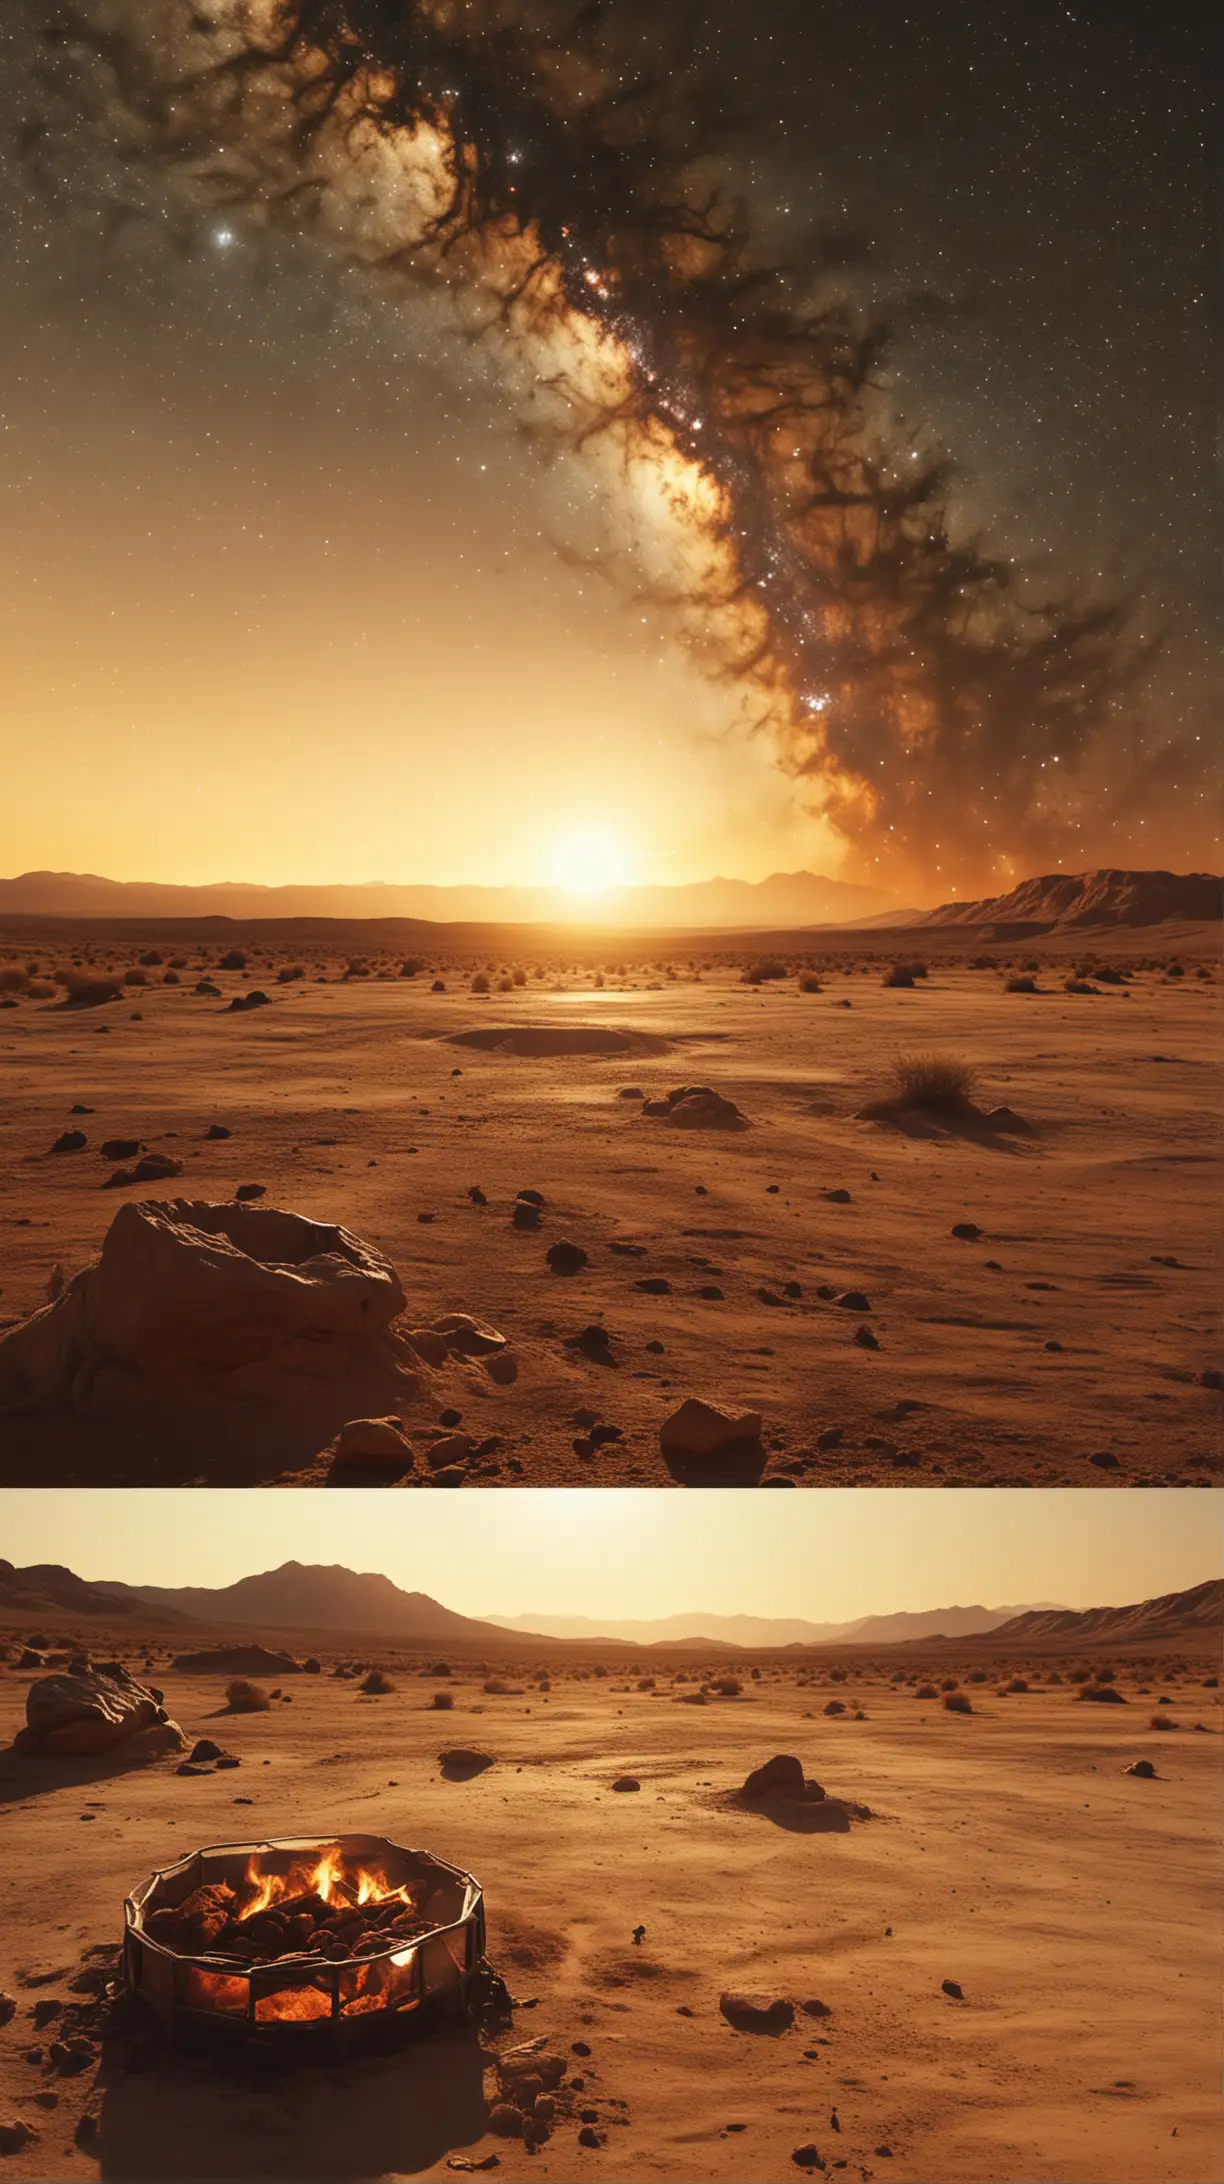 double exposure: movie still, view of distant galaxy seen from deep space and movie still, 1983, californian style, sand desert in middle east, campfire, sunset, landscape, wide shot, natural lighting, in the style of cinematic stills, cine still 50d, photo realistic, Yellow - Core.